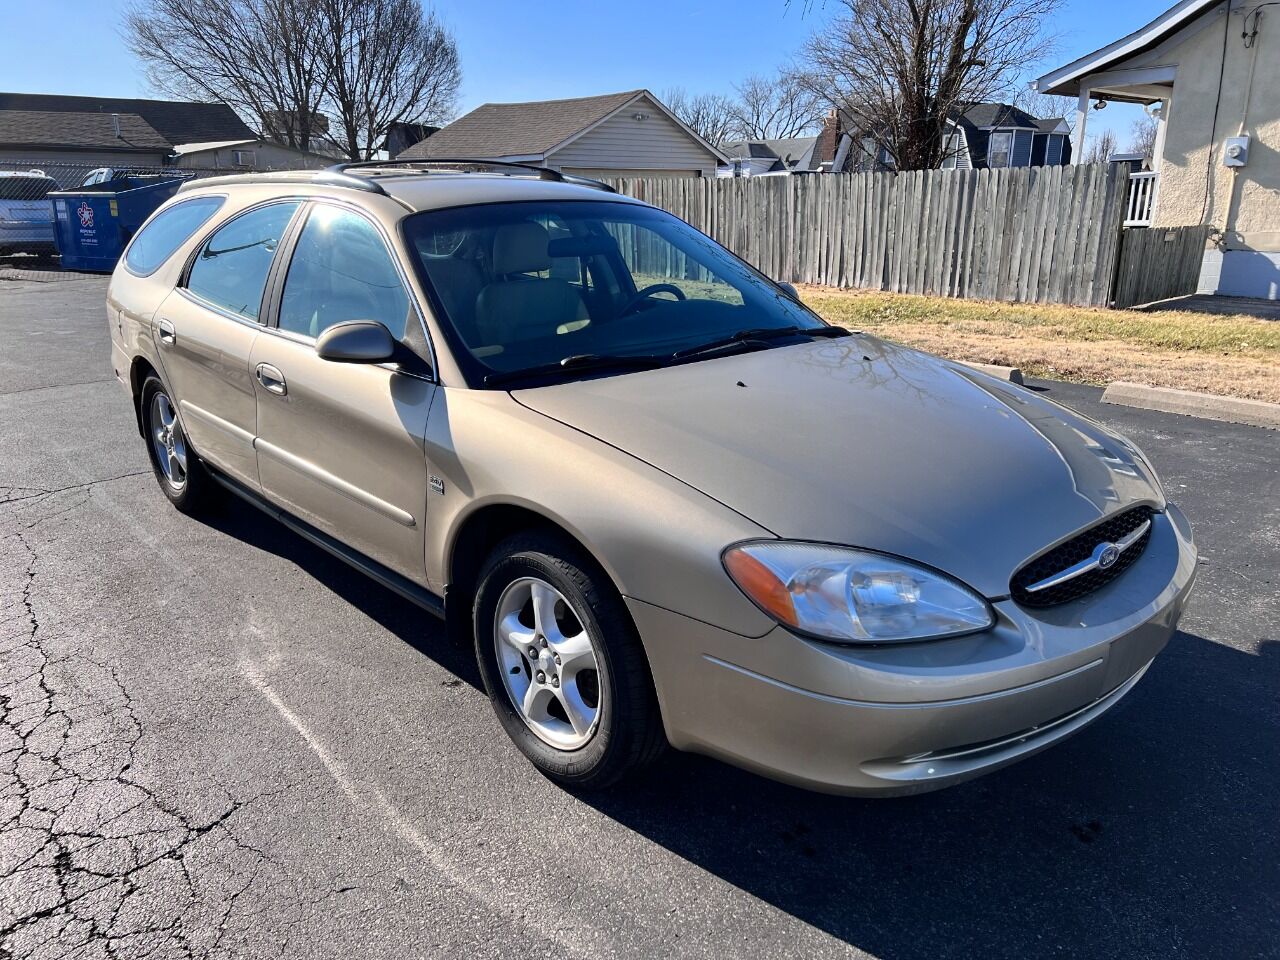 2001 Ford Taurus For Sale In Baltimore, MD - Carsforsale.com®